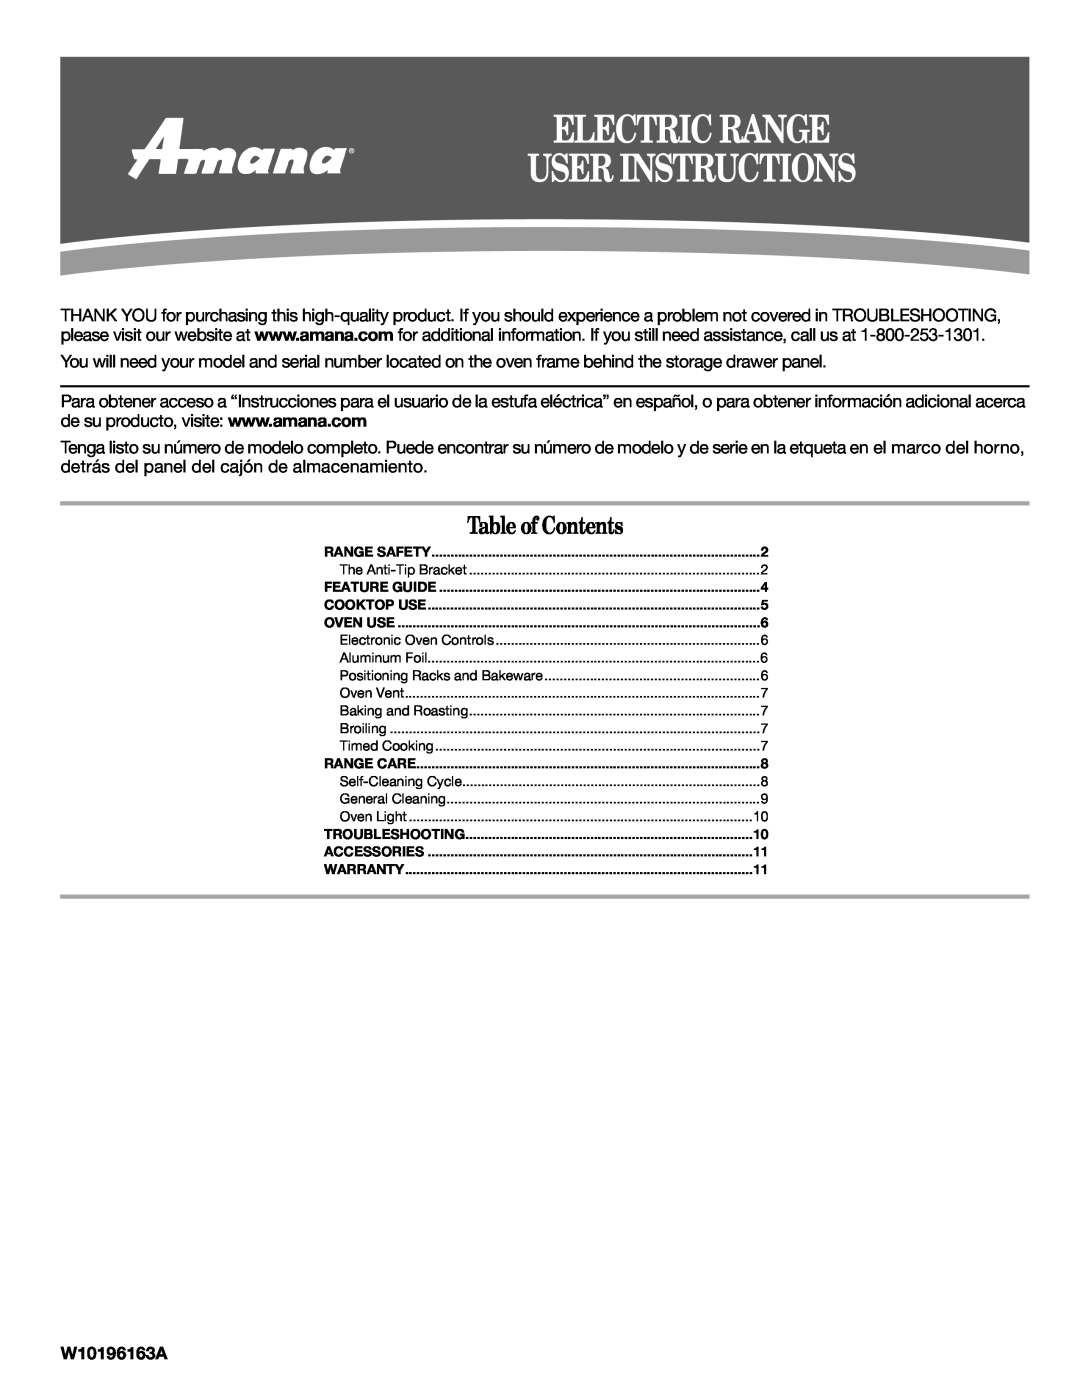 Amana AER5522VAW warranty W10196163A, Electric Range User Instructions, Table of Contents 